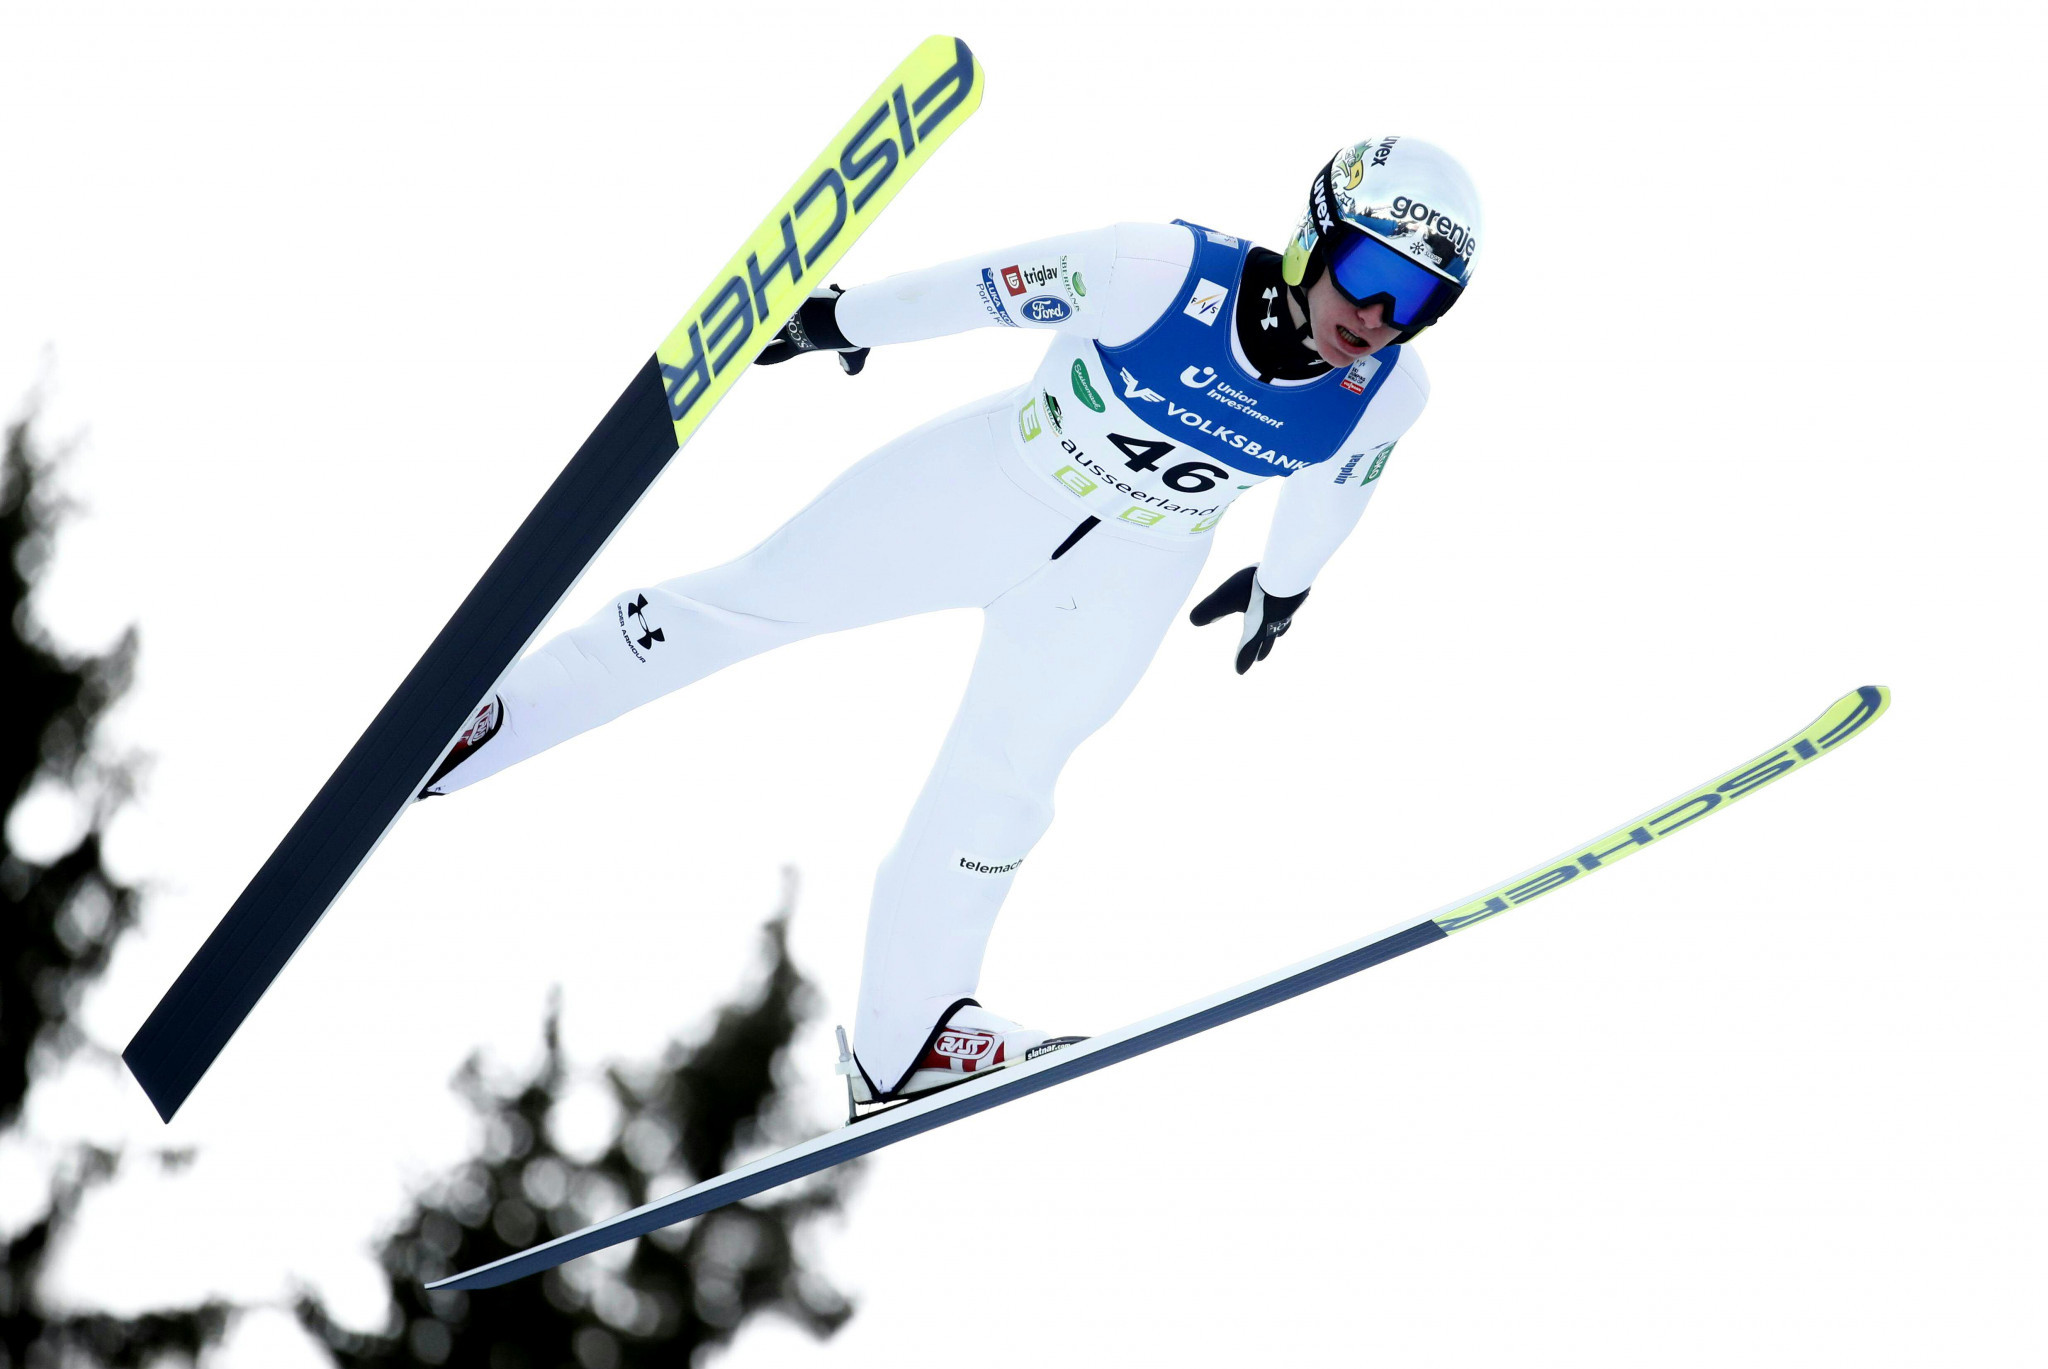 Peter Prevc of Slovenia triumphed in a rescheduled FIS Ski Jumping World Cup event ©Getty Images